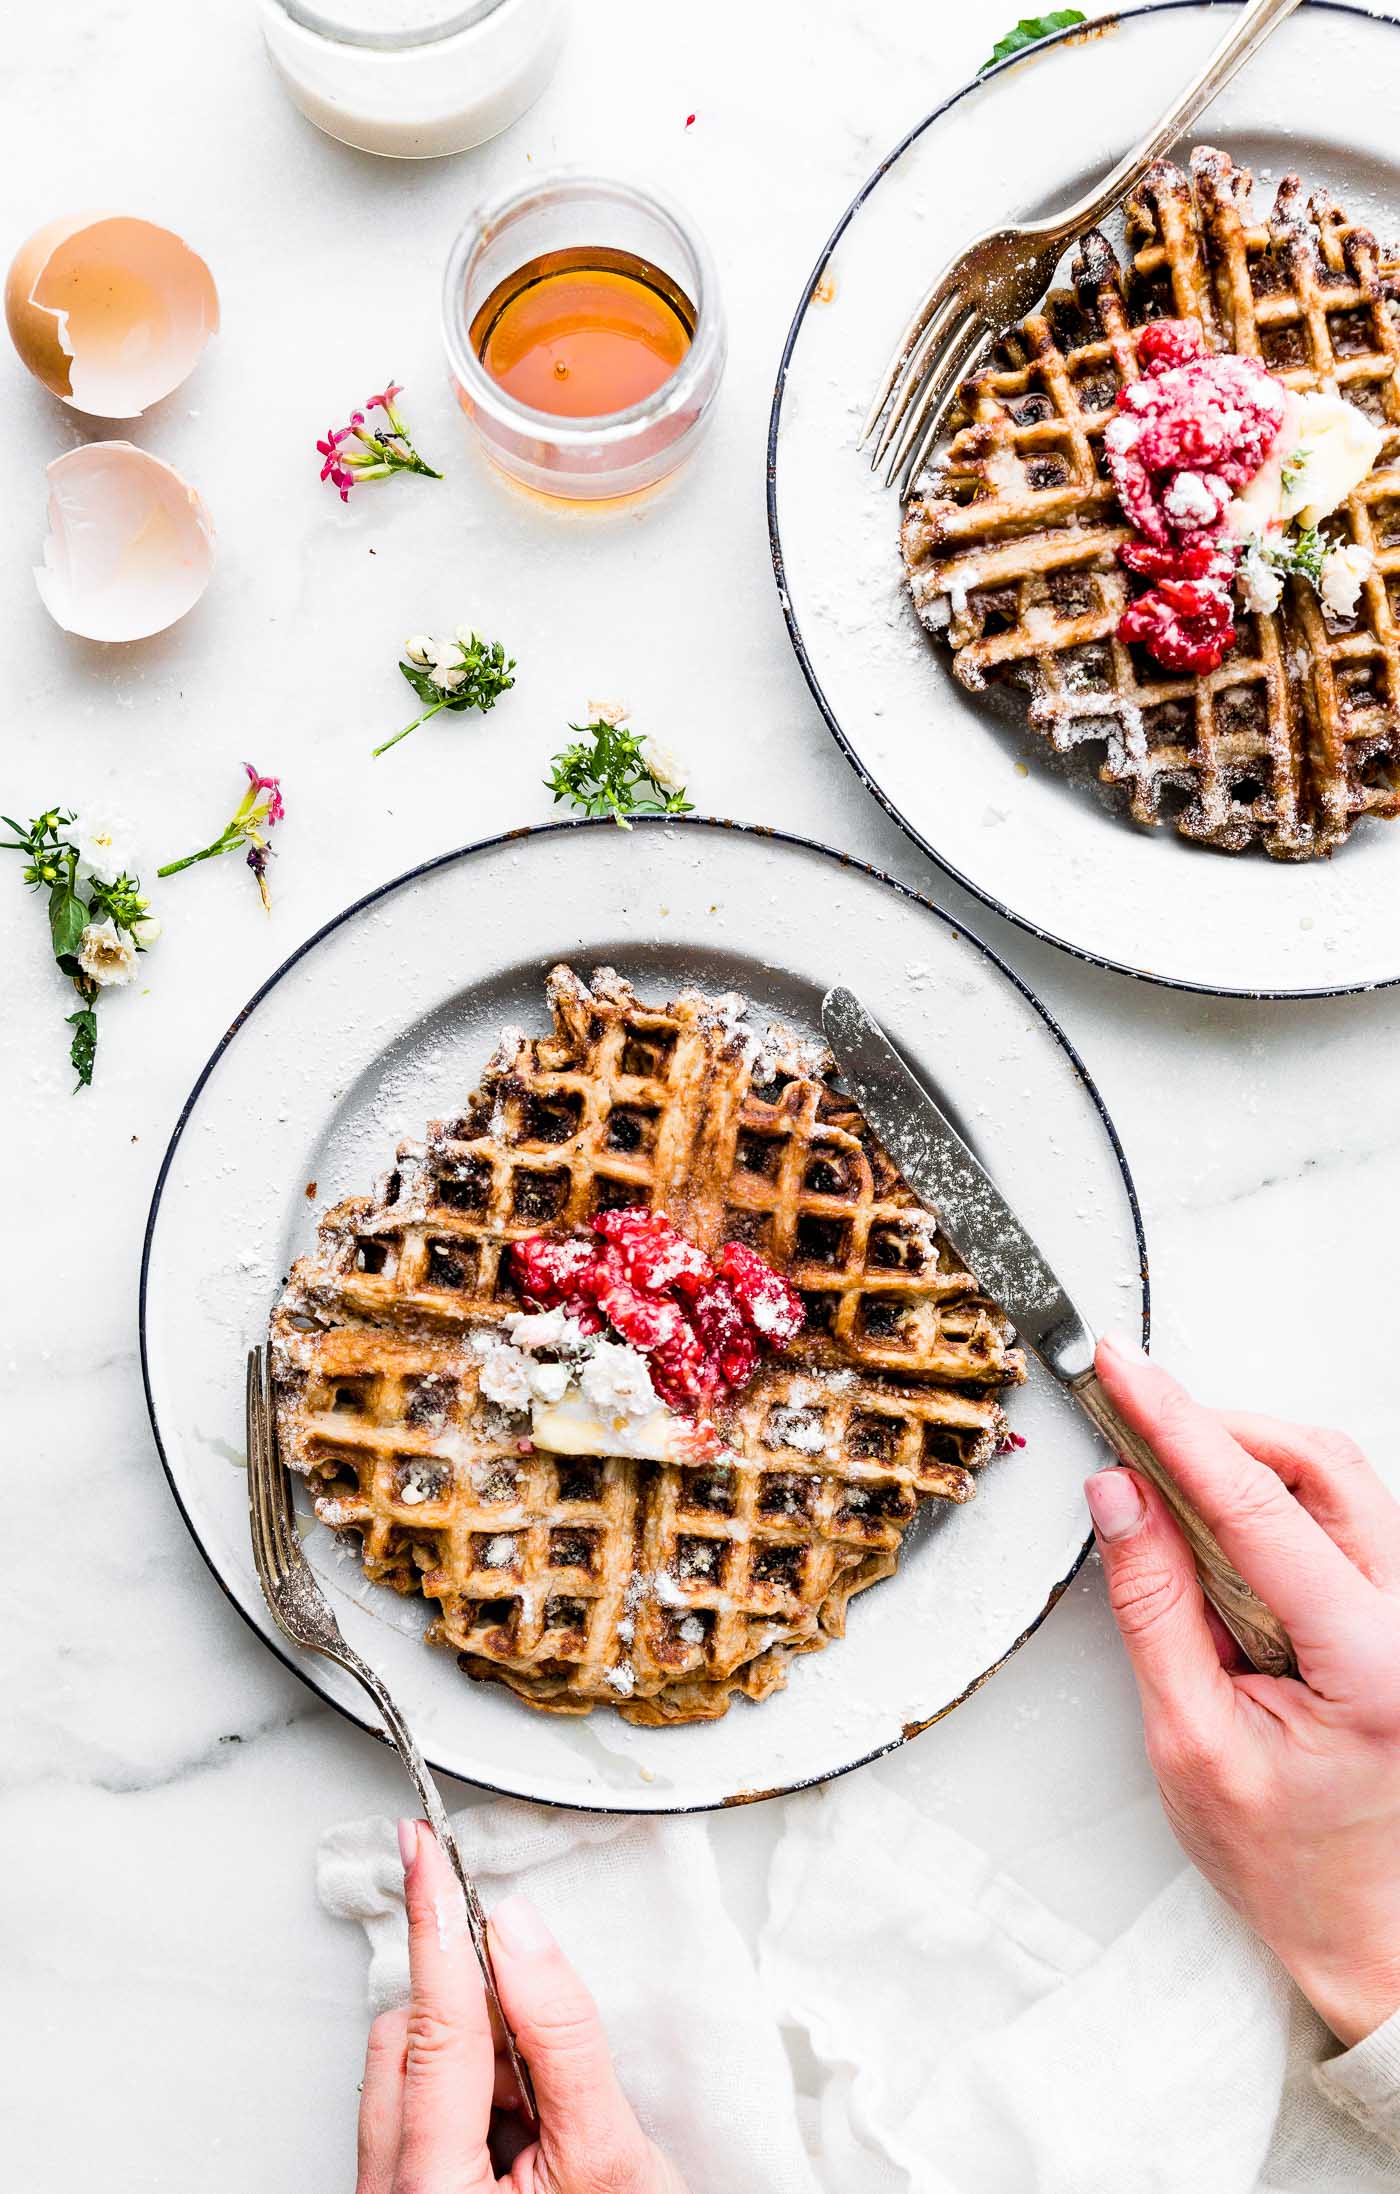 Two white plates with stacks of Paleo waffles, topped with berries, butter, maple syrup, and powdered sugar.